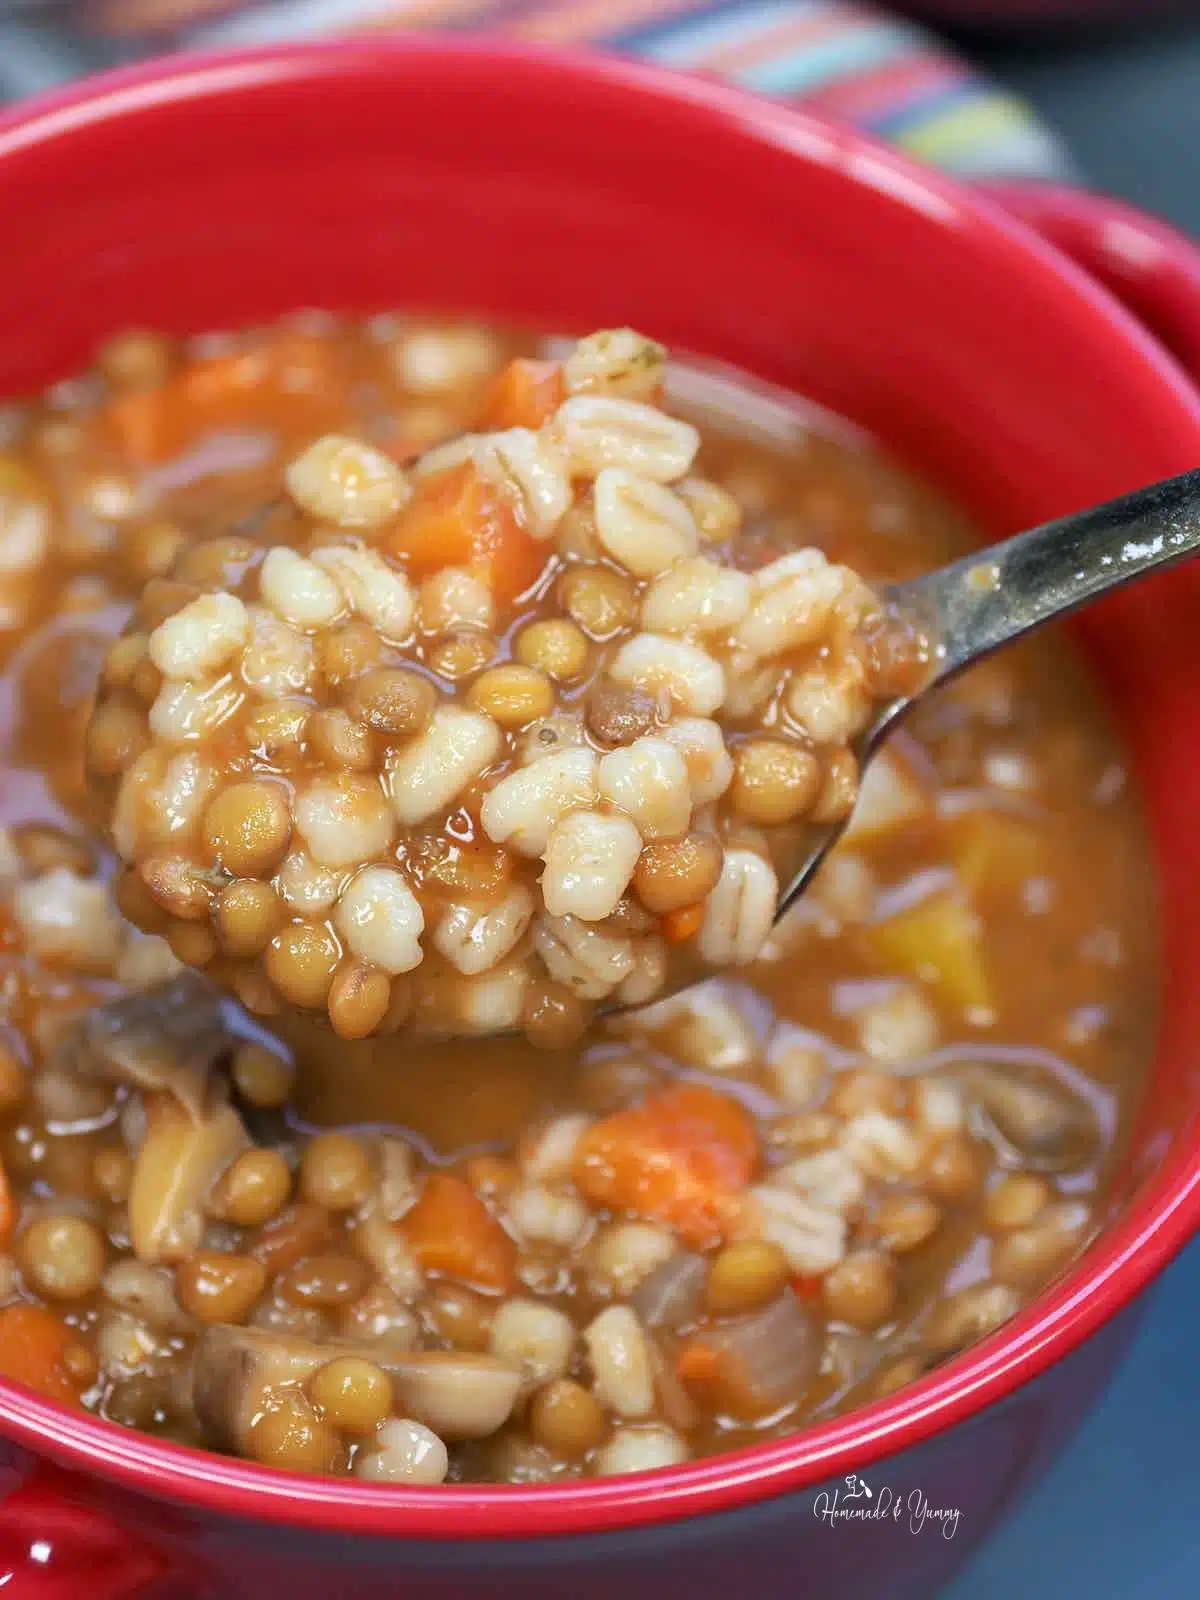 A spoonful of vegetarian soup packed with veggies, barley and lentils.